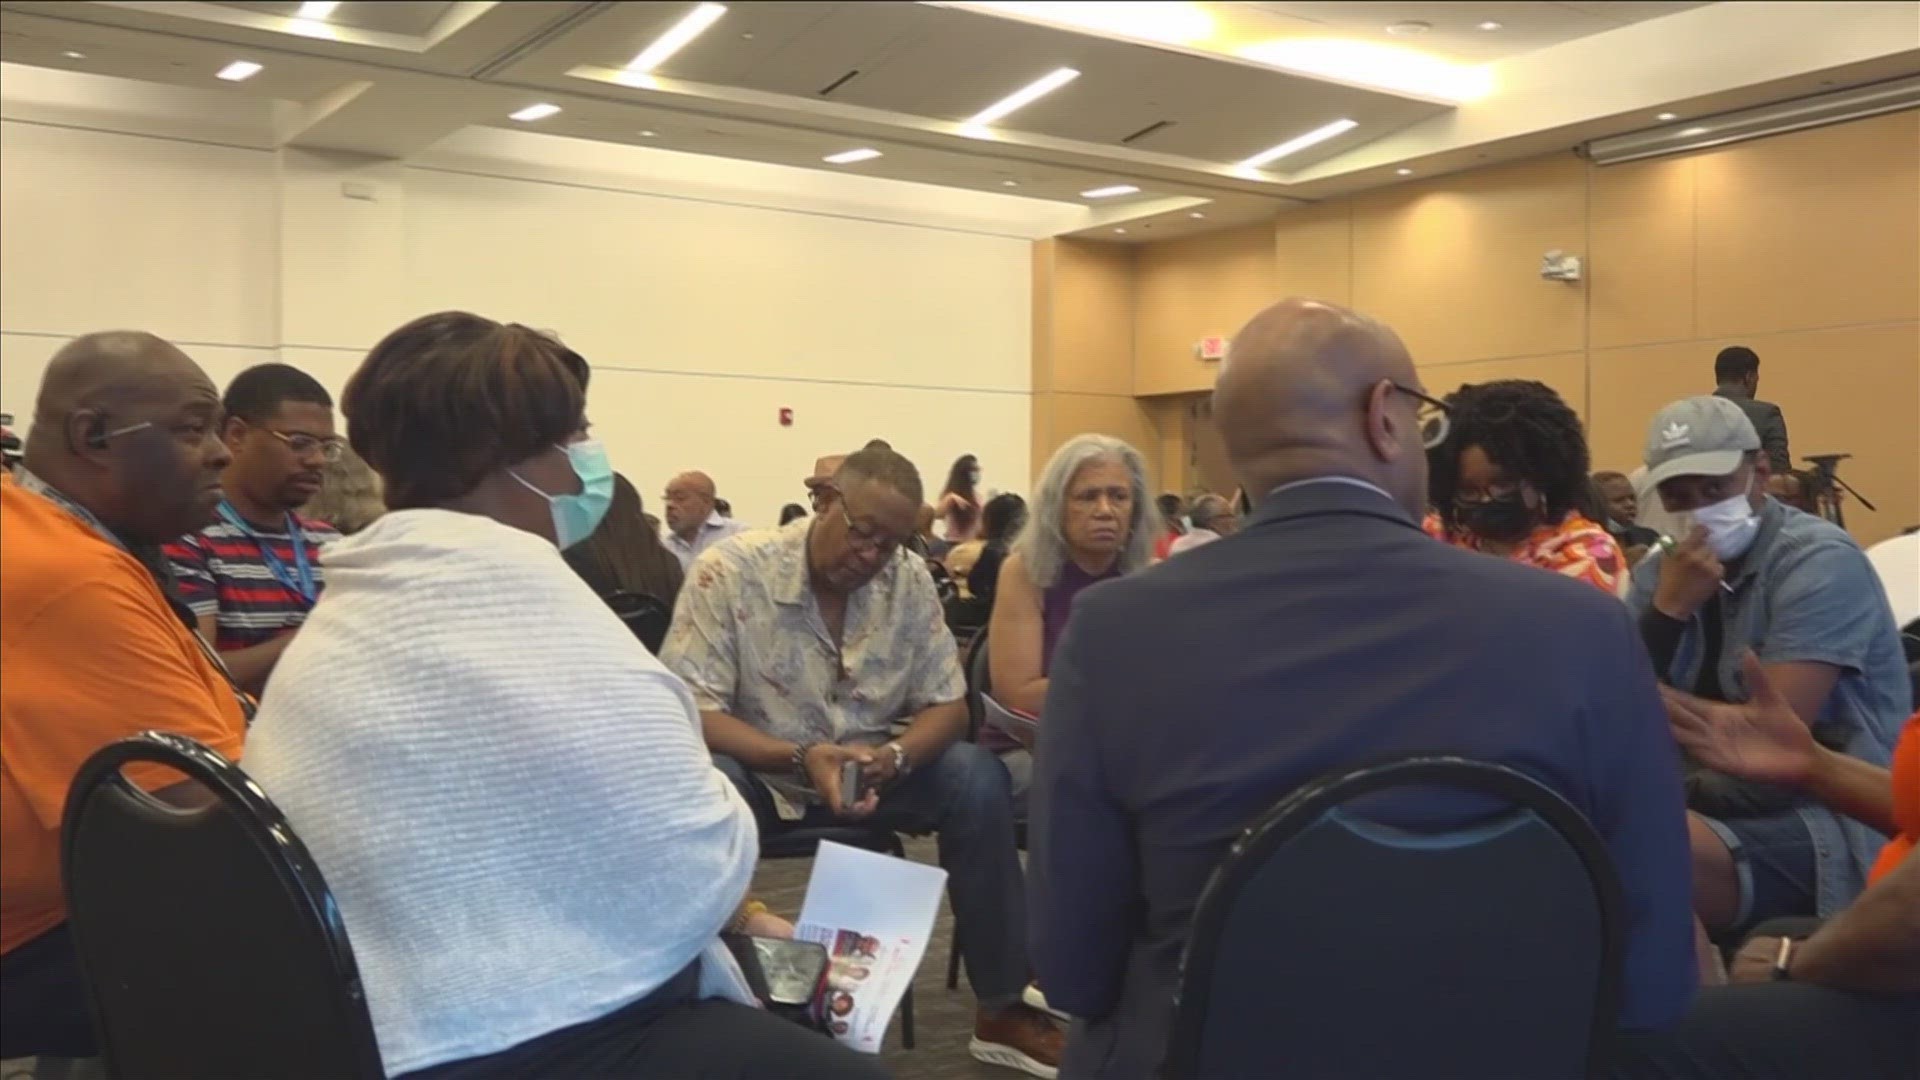 Seven months after Tyre Nichols' death, Memphians attended a meeting to discuss their frustrations with MPD.